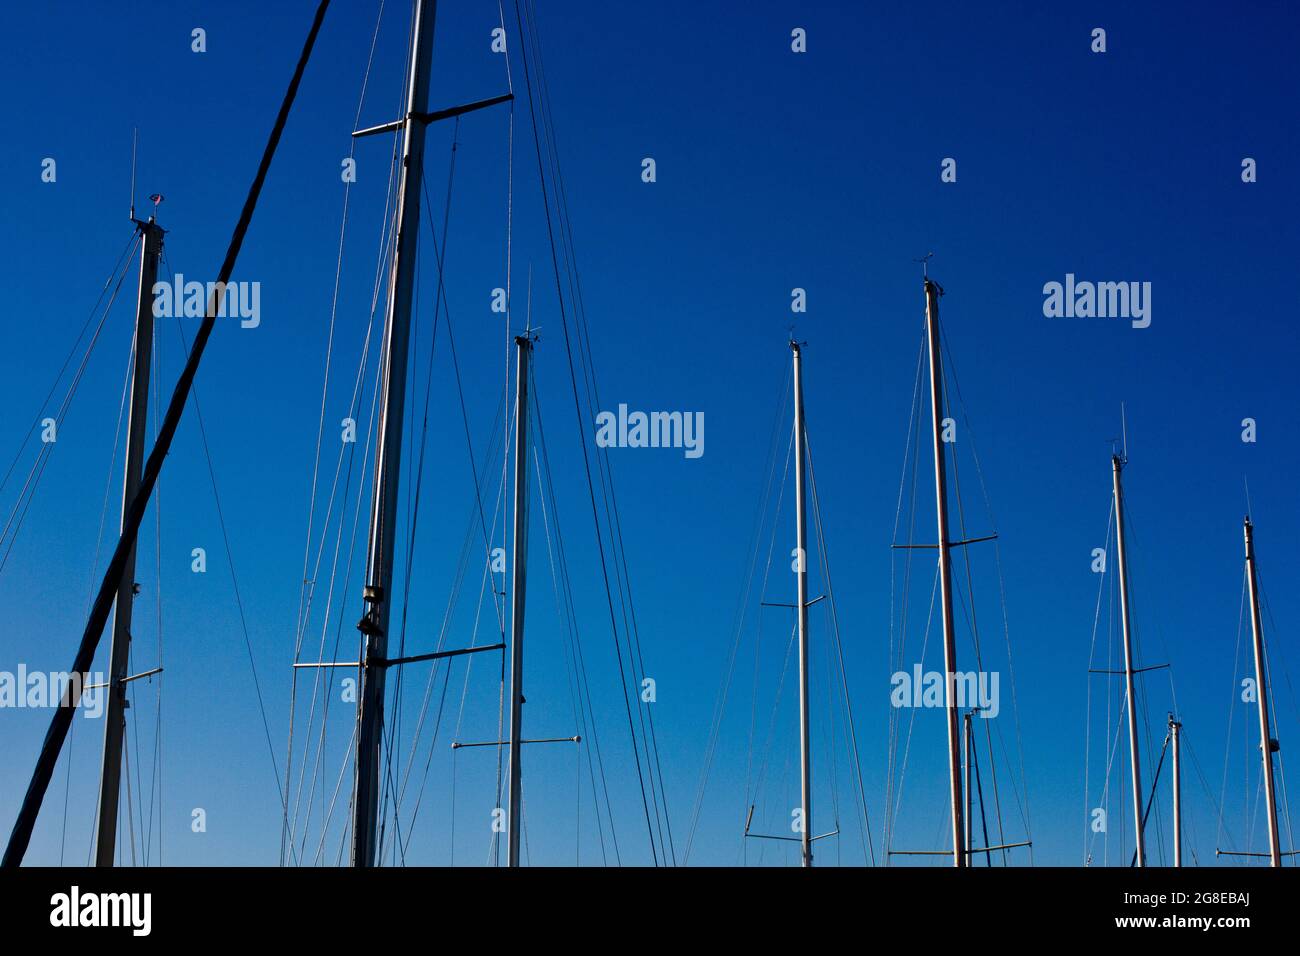 Masts of boats at anchor in Cania's Old Venetian Harbour on the island of Crete, Greece Stock Photo